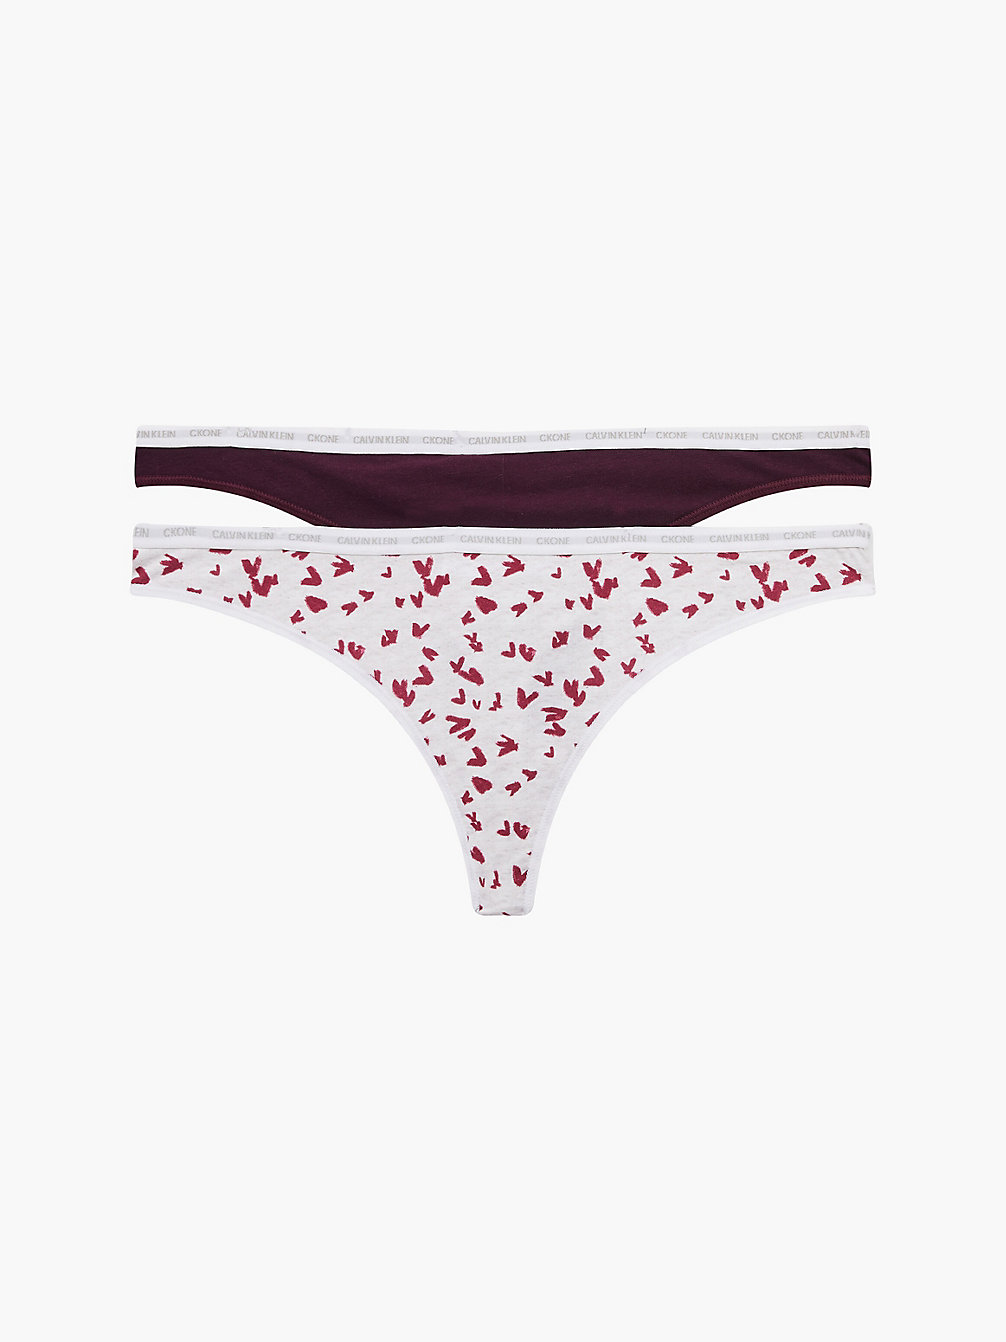 Pack De 2 Tangas - CK One > RHONE/HEART PRINT_SNOW HEATHER > undefined mujer > Calvin Klein